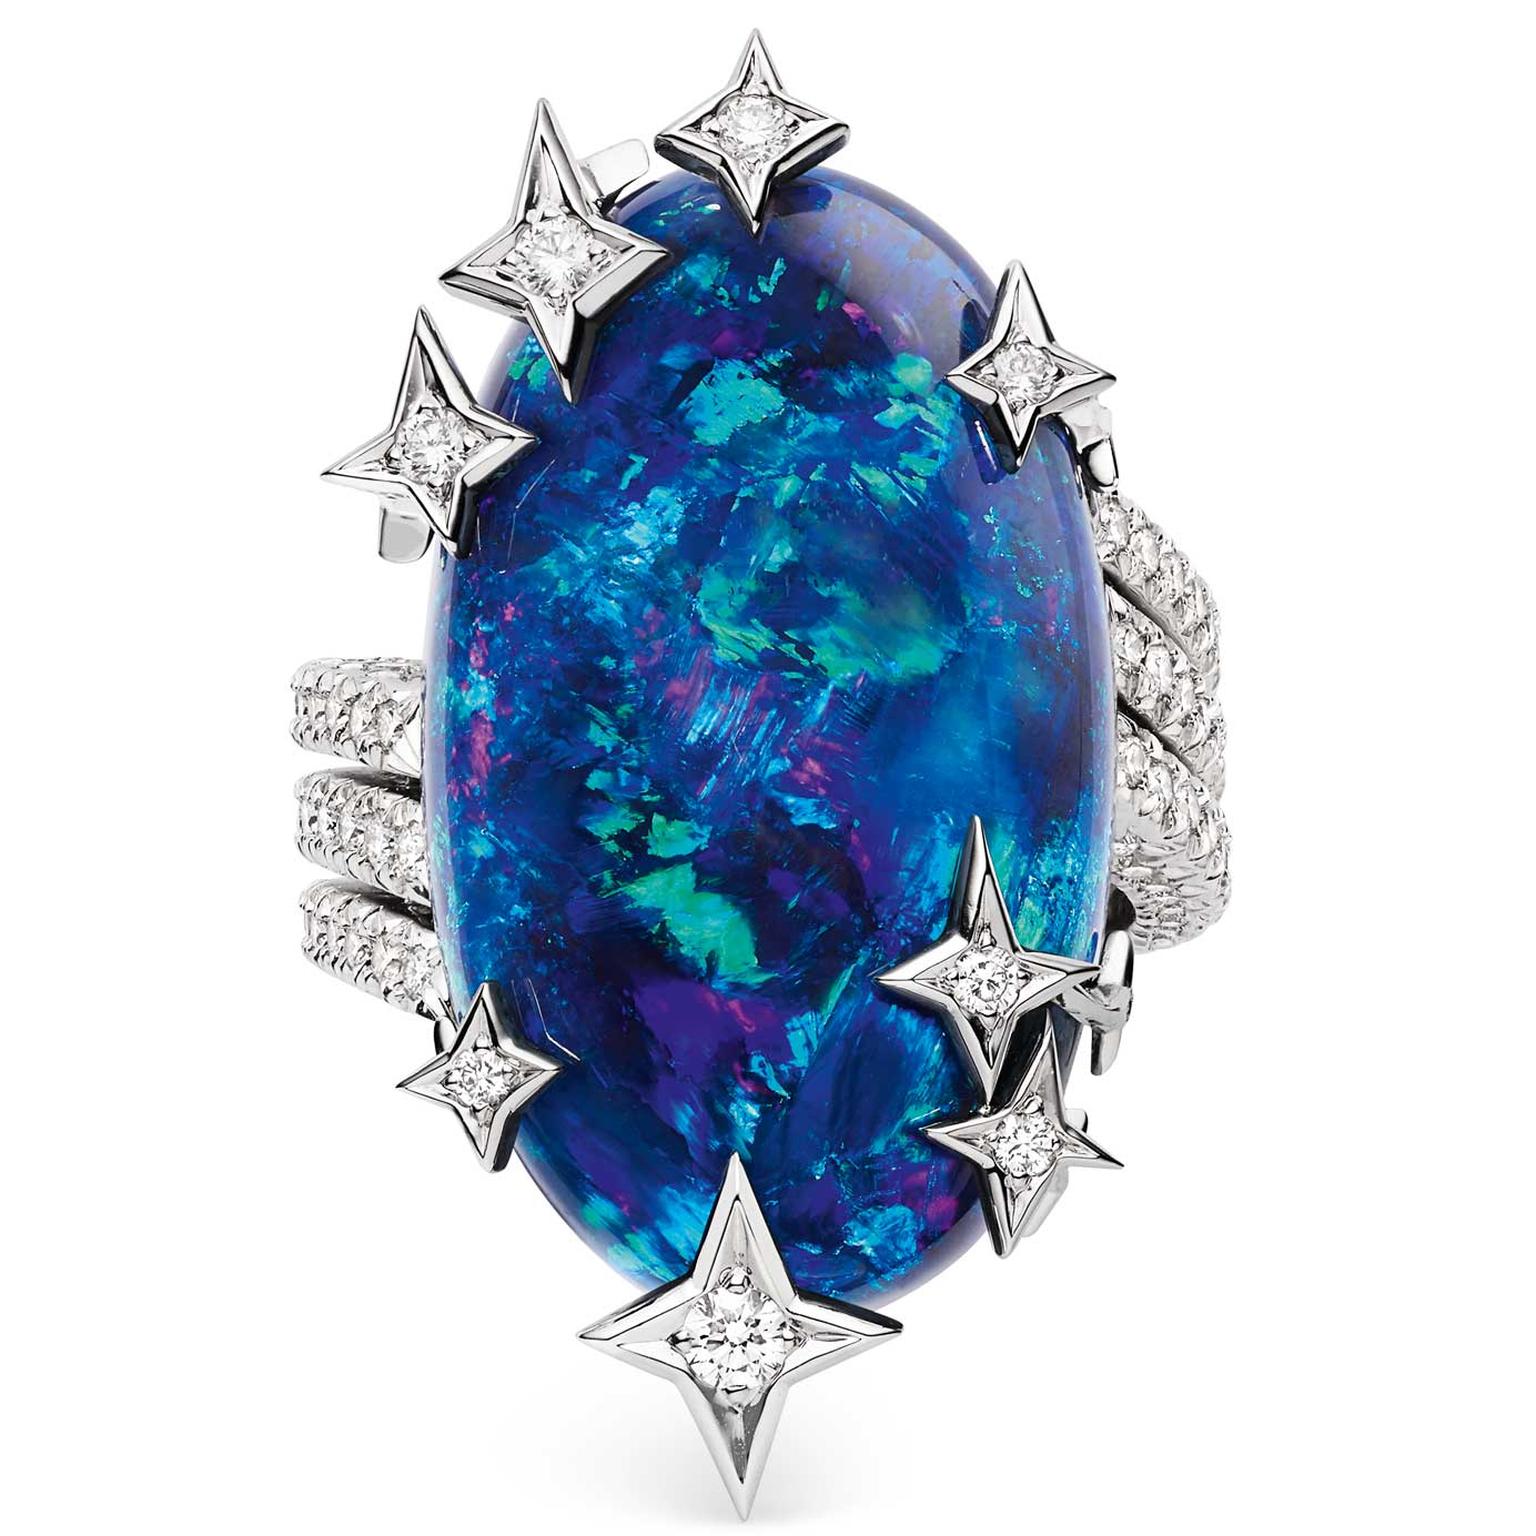 Chaumet's Latest High Jewellery Collection, 'Perspectives de